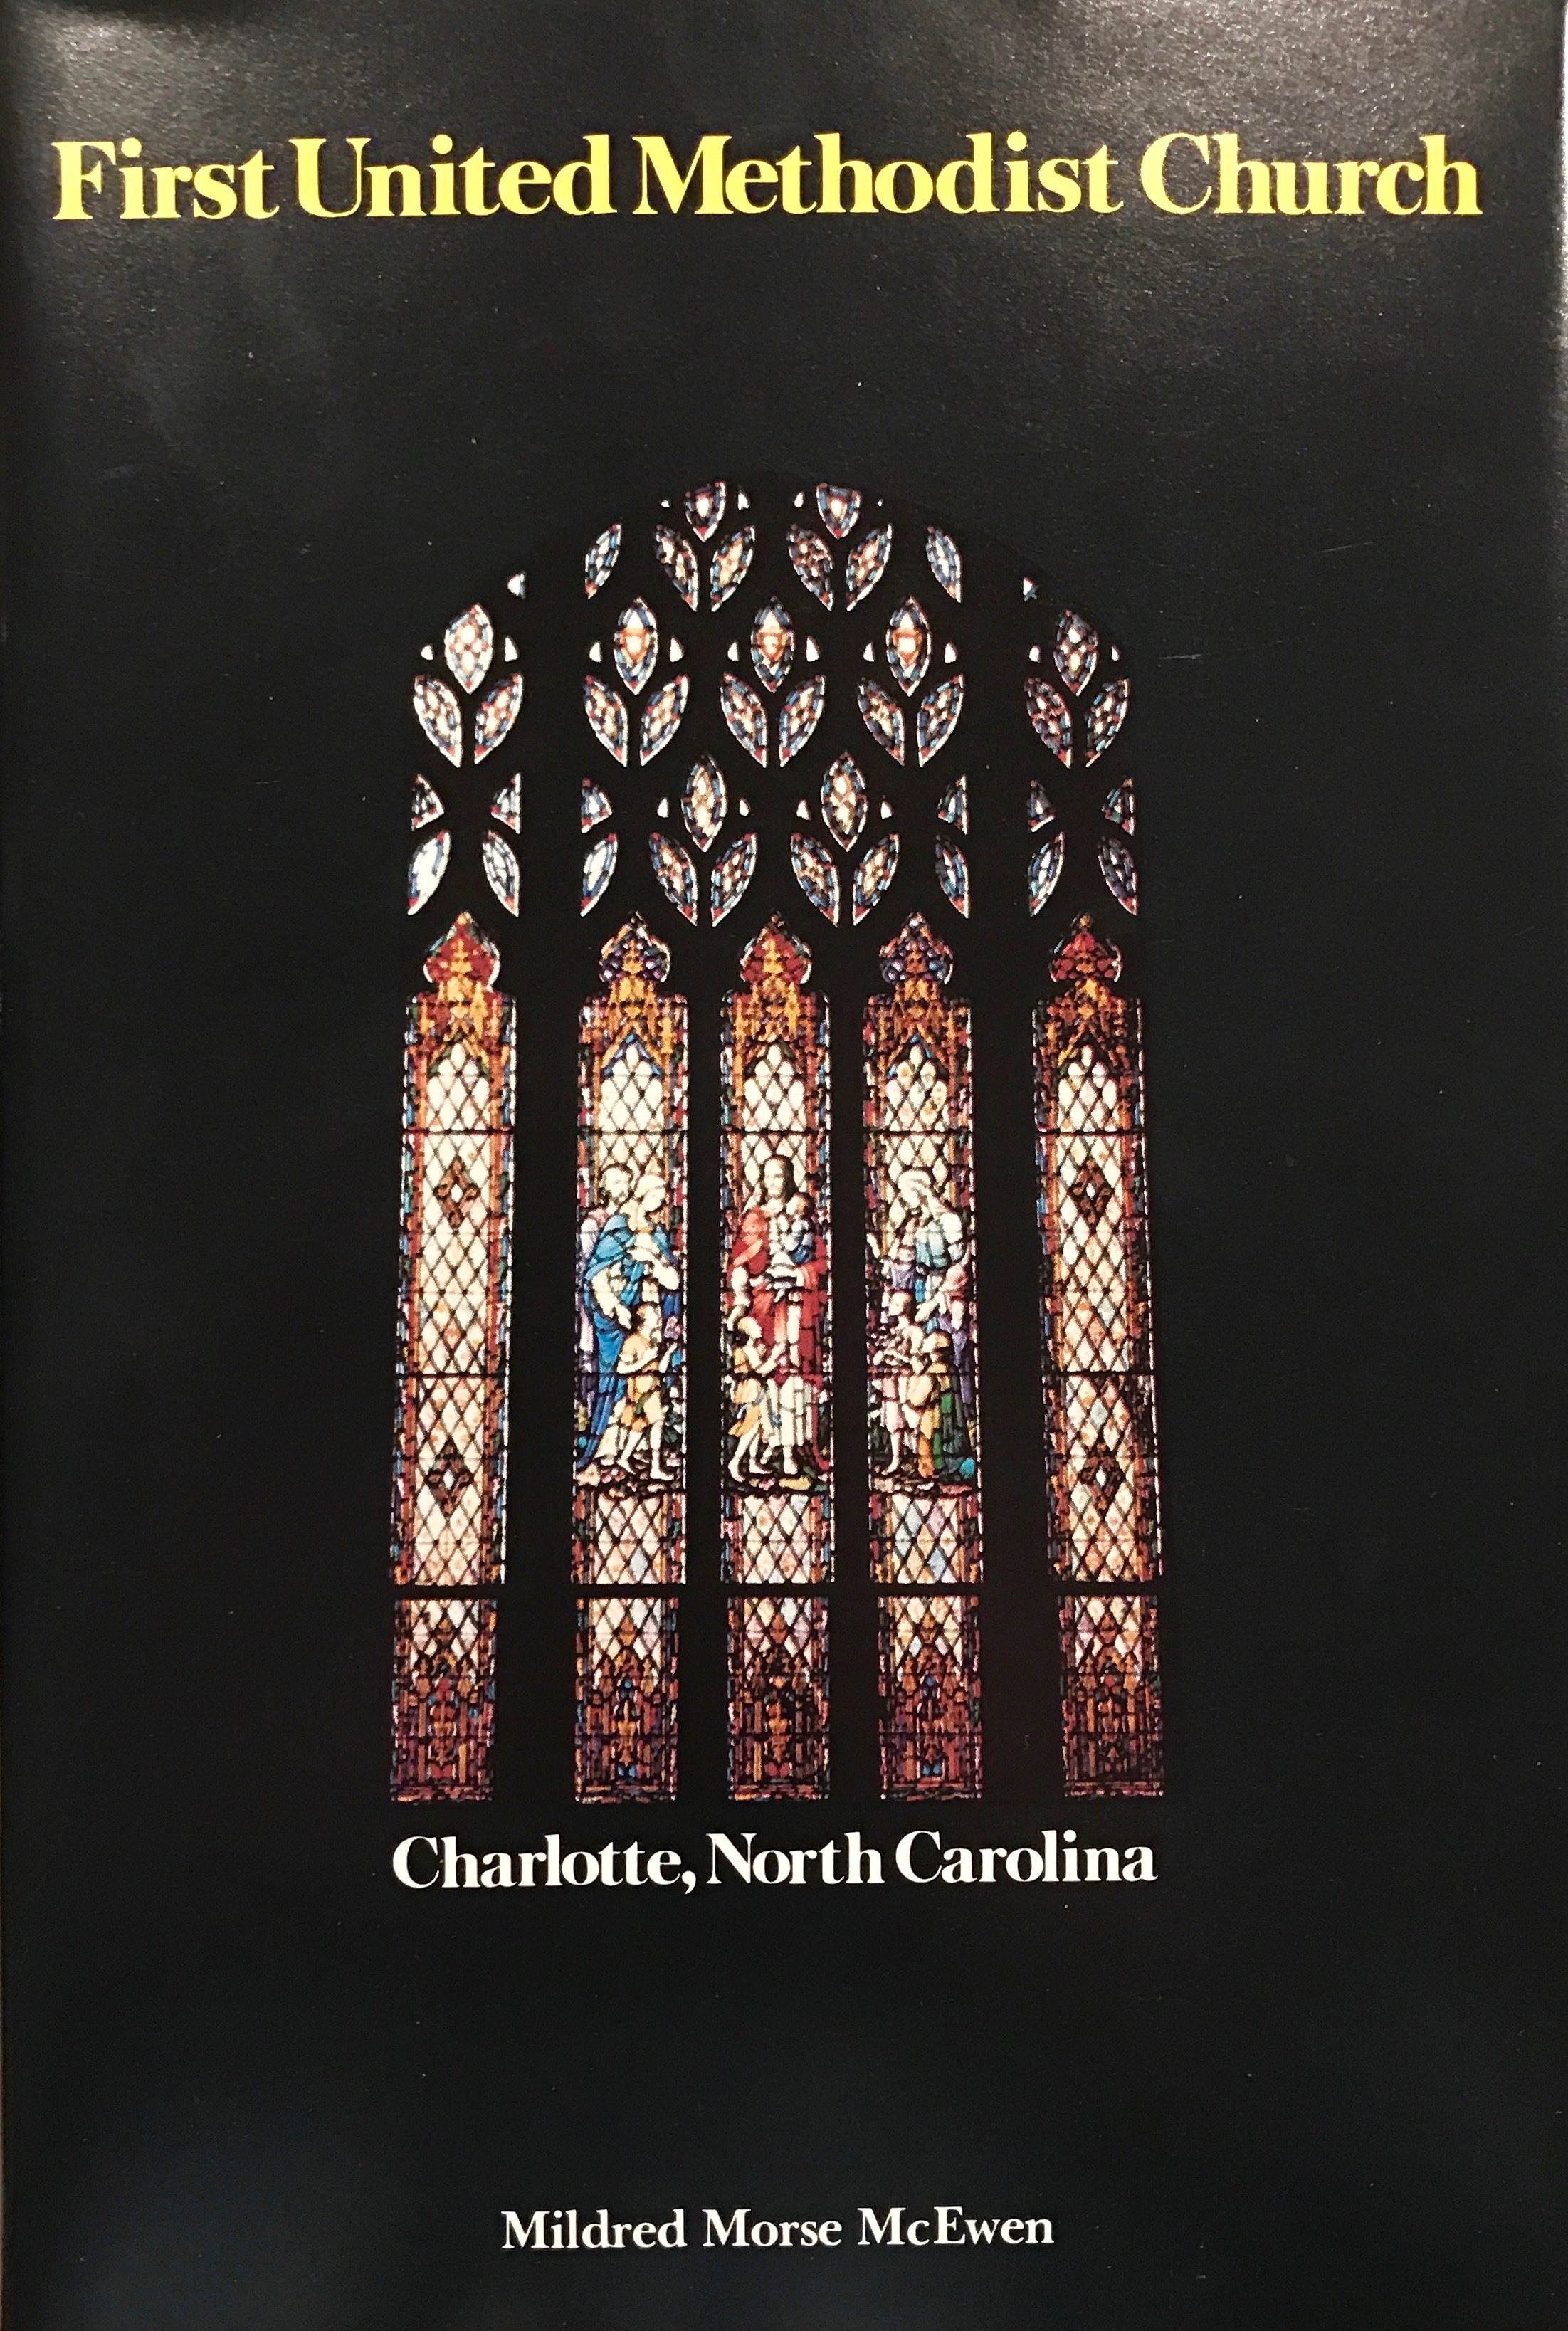   For a thorough recounting of the history of First Methodist Charlotte, pick up a copy of Mildred McEwen's book from the 1980s. You can still find used copies on Amazon.  